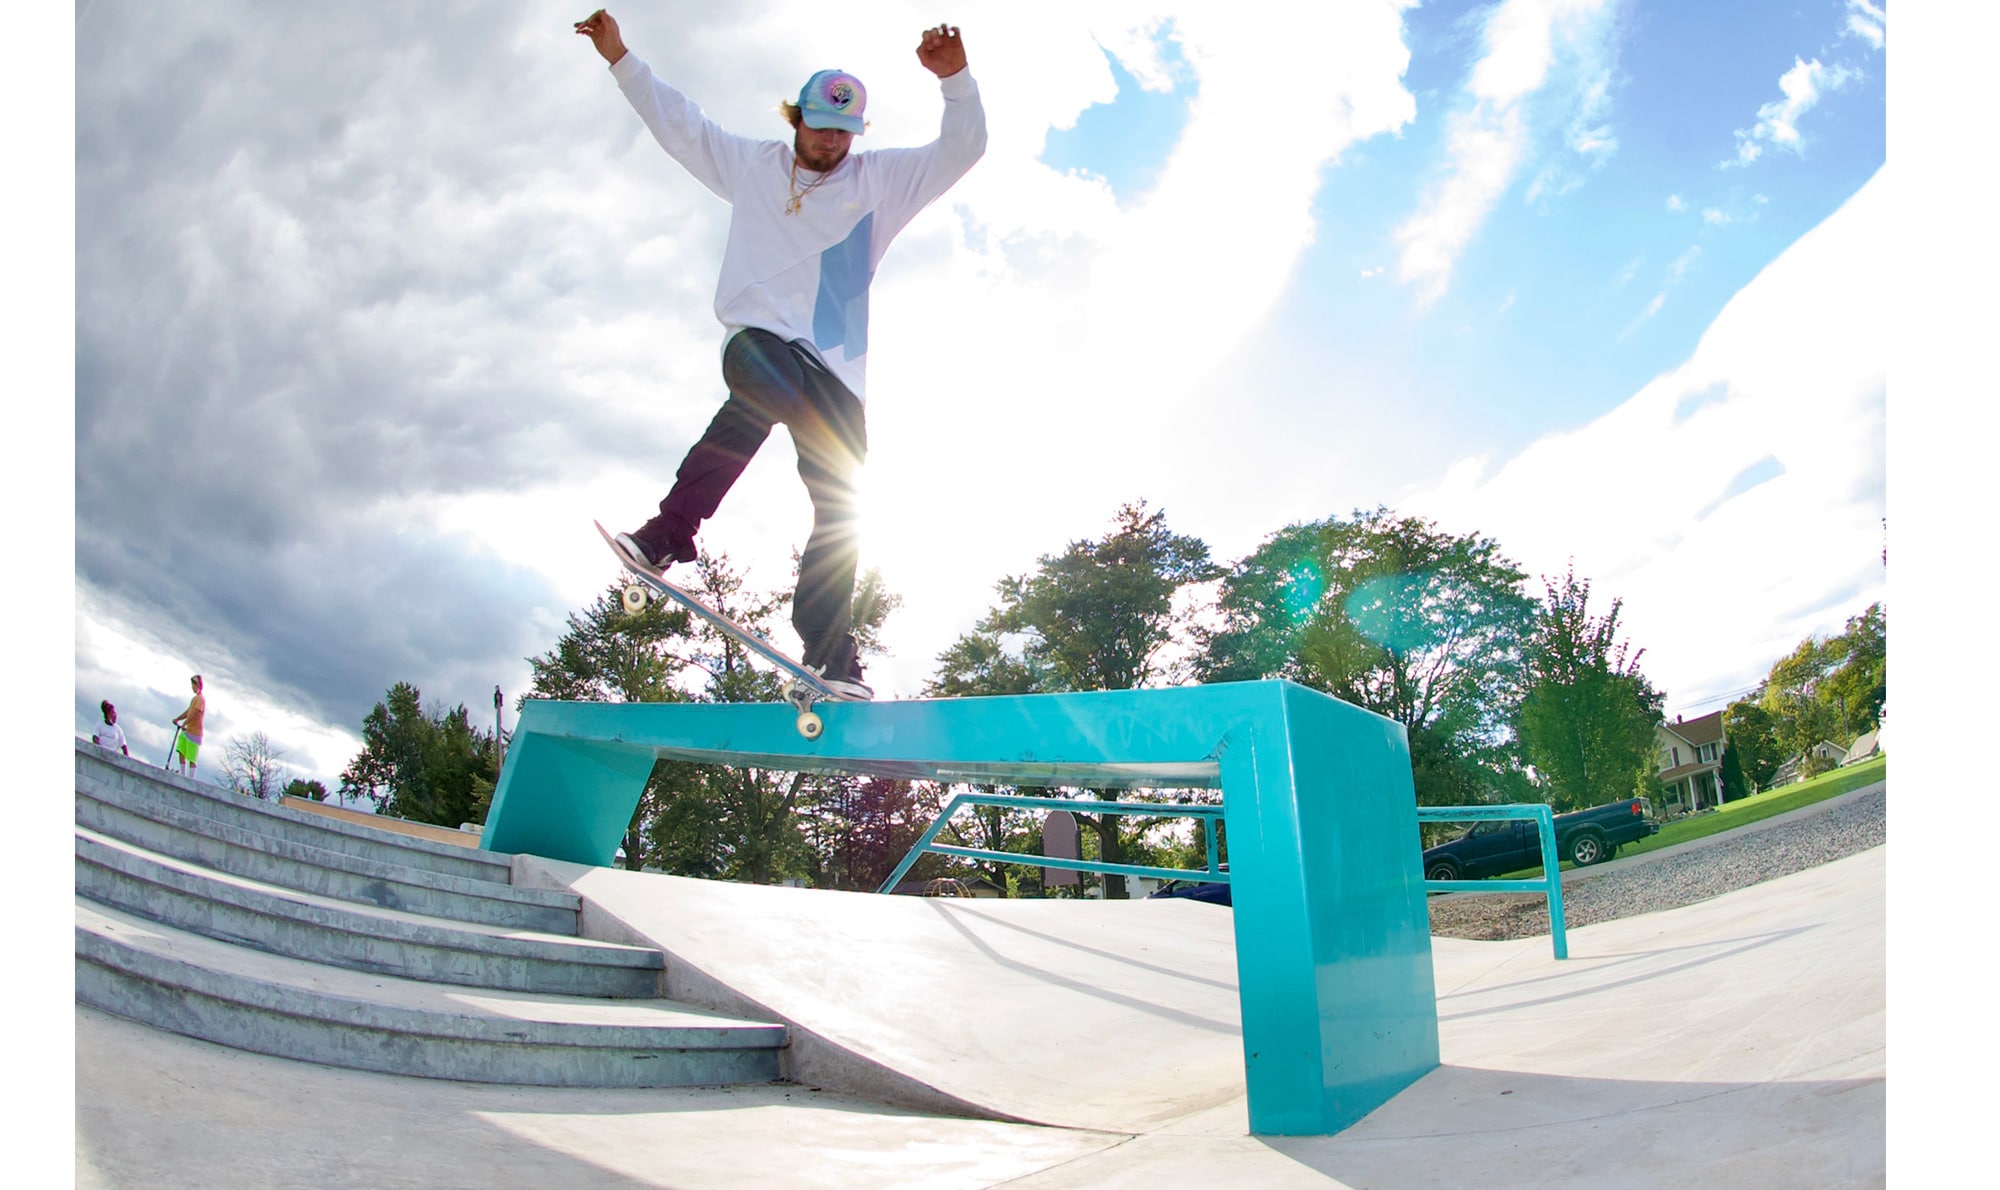 Luke Nelson Skatepark featuring amazing hubbas for this crooks